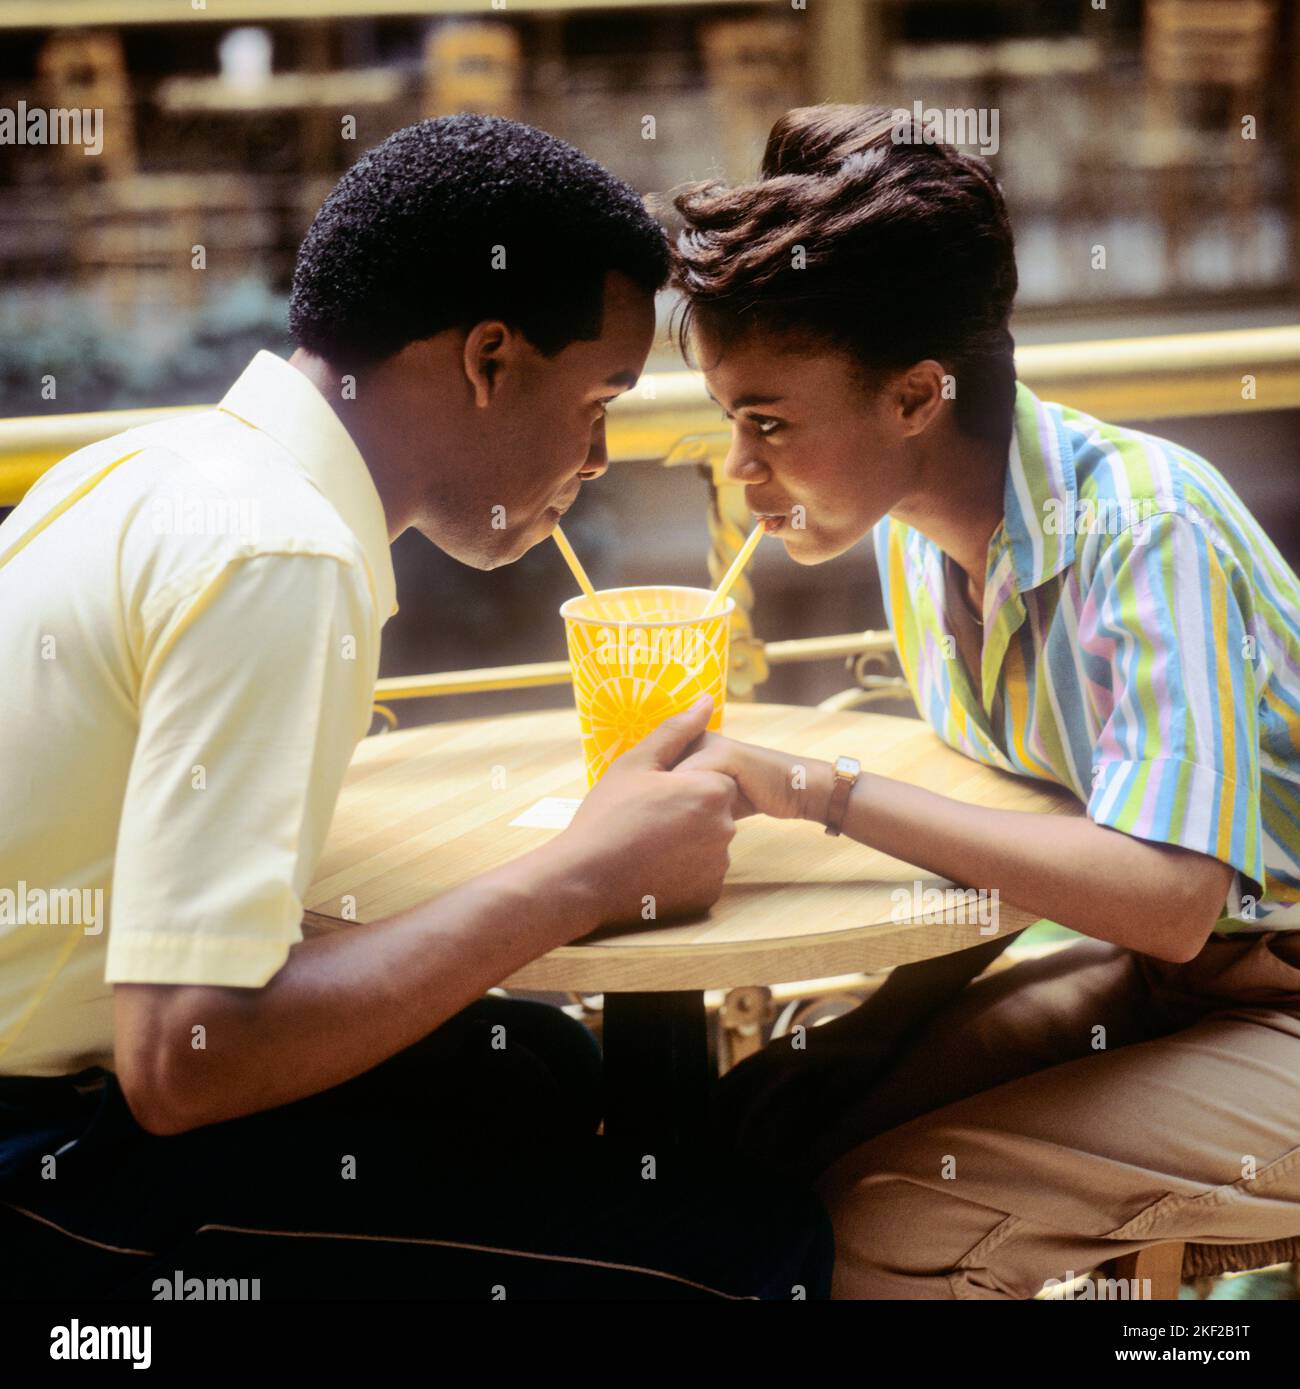 1980s ROMANTIC AFRICAN-AMERICAN COUPLE BOY AND GIRL FACE TO FACE HOLDING HANDS SHARING A SOFT DRINK WITH TWO STRAWS - kf20615 TEU001 HARS OLD FASHION 1 STYLE COMMUNICATION YOUNG ADULT STRONG JOY LIFESTYLE FEMALES COPY SPACE FRIENDSHIP HALF-LENGTH LADIES PERSONS CARING MALES TEENAGE GIRL TEENAGE BOY STRAWS DATING SUCCESS HAPPINESS LEISURE AFRICAN-AMERICANS AFRICAN-AMERICAN EXCITEMENT BLACK ETHNICITY HOLDING HANDS TO ATTRACTION RELATIONSHIPS FACE TO FACE CONNECTION COURTSHIP CONCEPTUAL CONSUME CONSUMING HYDRATION PERSONAL ATTACHMENT POSSIBILITY AFFECTION EMOTION REFRESHING SOCIAL ACTIVITY Stock Photo